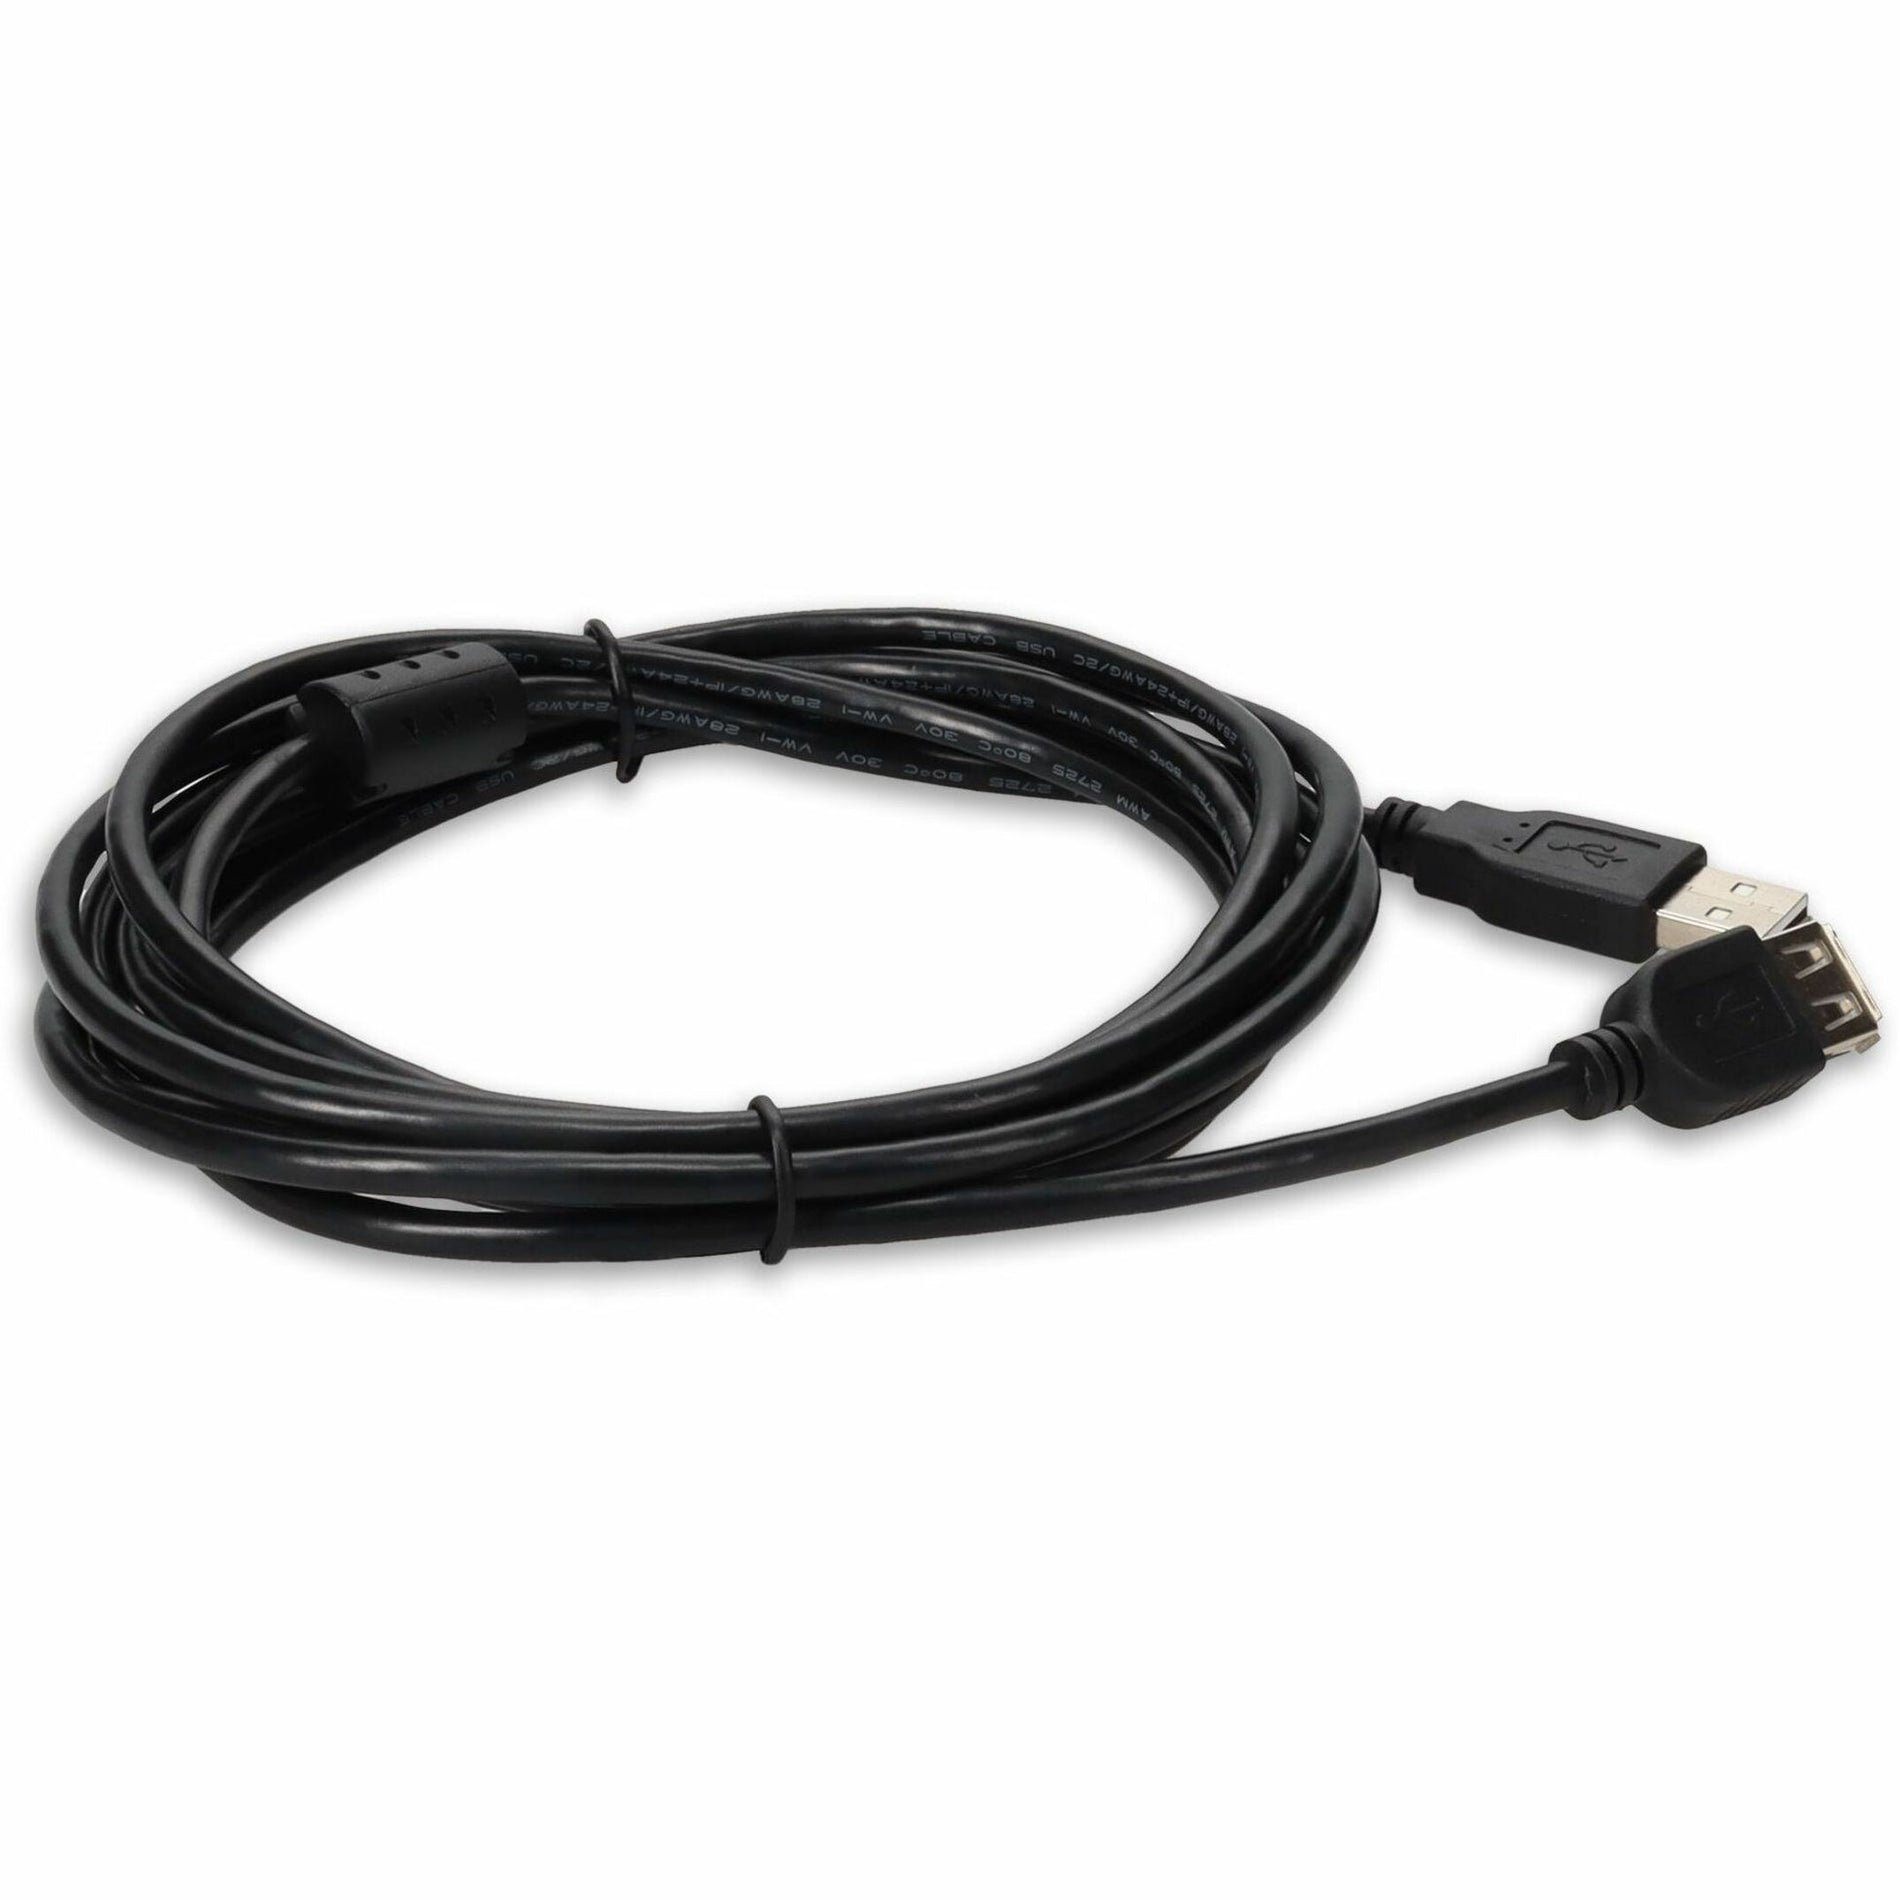 USBEXTAA10FB 10ft (3M) USB 2.0 A to A Extension Cable - Male to Female Black